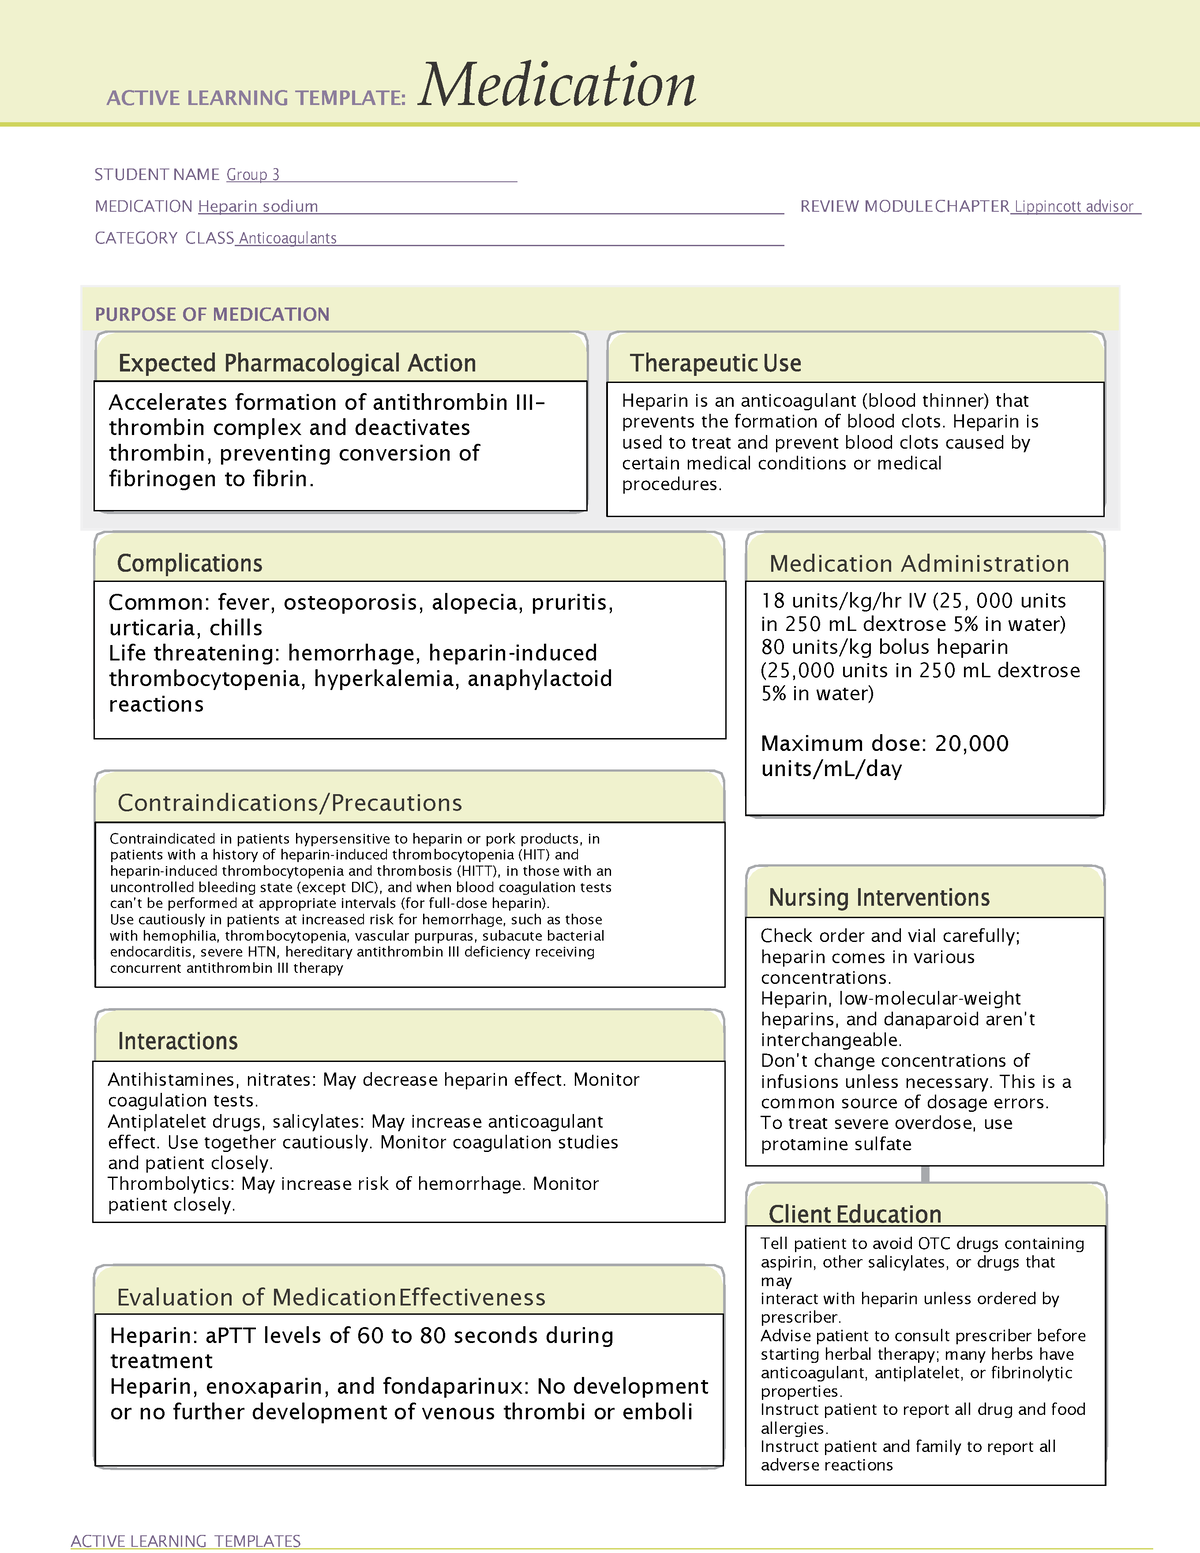 ms-ii-sim-day-3-ati-med-form-heparin-group-3-active-learning-template